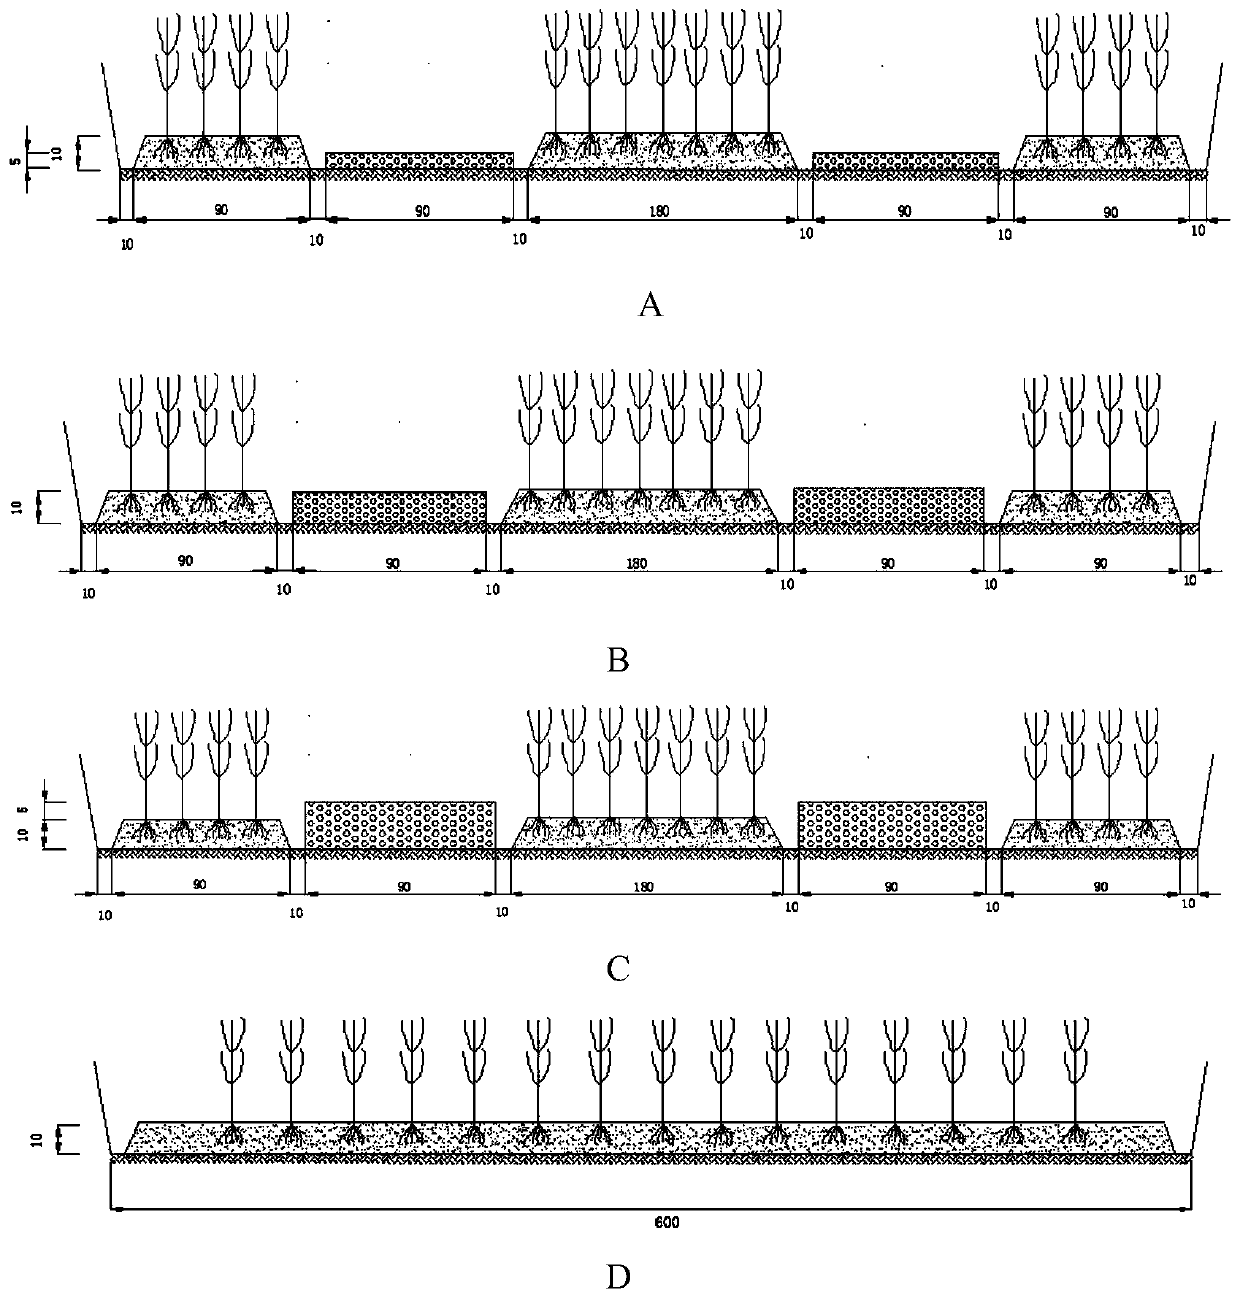 Application of akadama soil, method for removing phosphorus in farmland ditch, and plant cultivation matrix